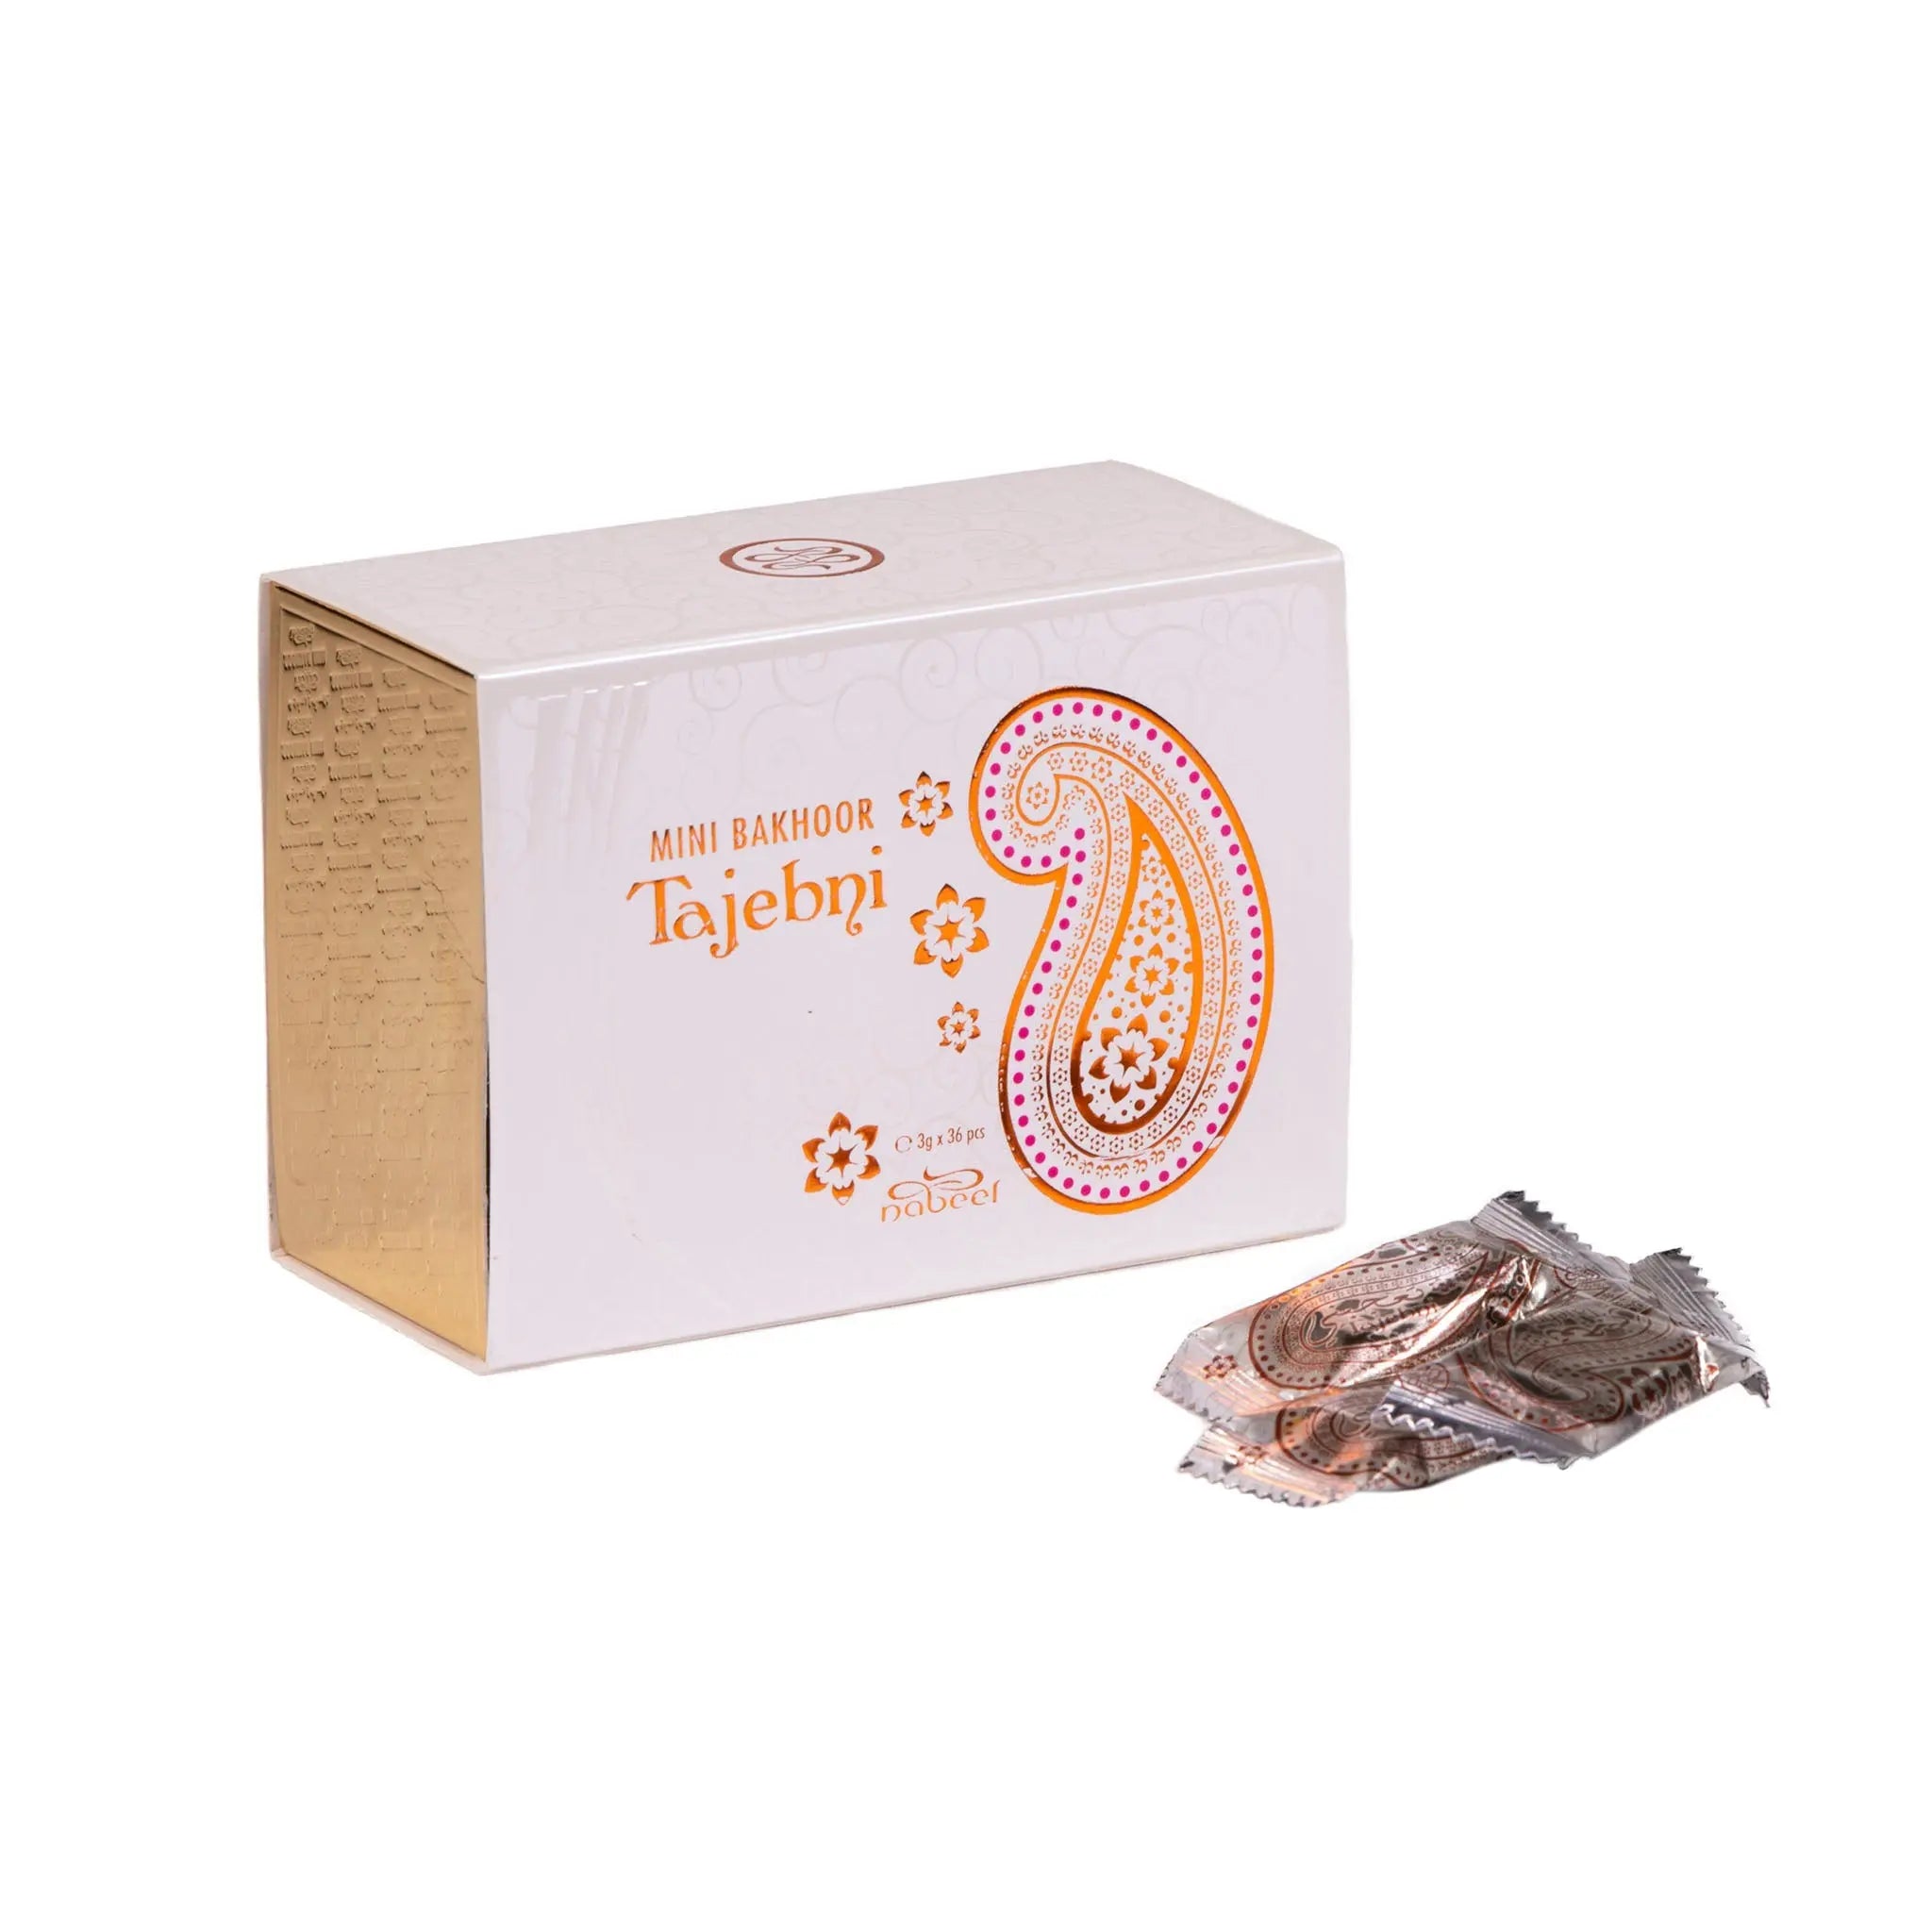 The image shows a white box for "Mini Bakhoor Tajebni" by Nabeel Perfumes. The box has a large paisley design in shades of orange and pink on the front, along with the product name in both English and Arabic. The left side of the box is gold with embossed Arabic script. Next to the box are several small, sealed packets with an orange and brown color scheme that matches the box's design. These packets likely contain the bakhoor incense pieces.